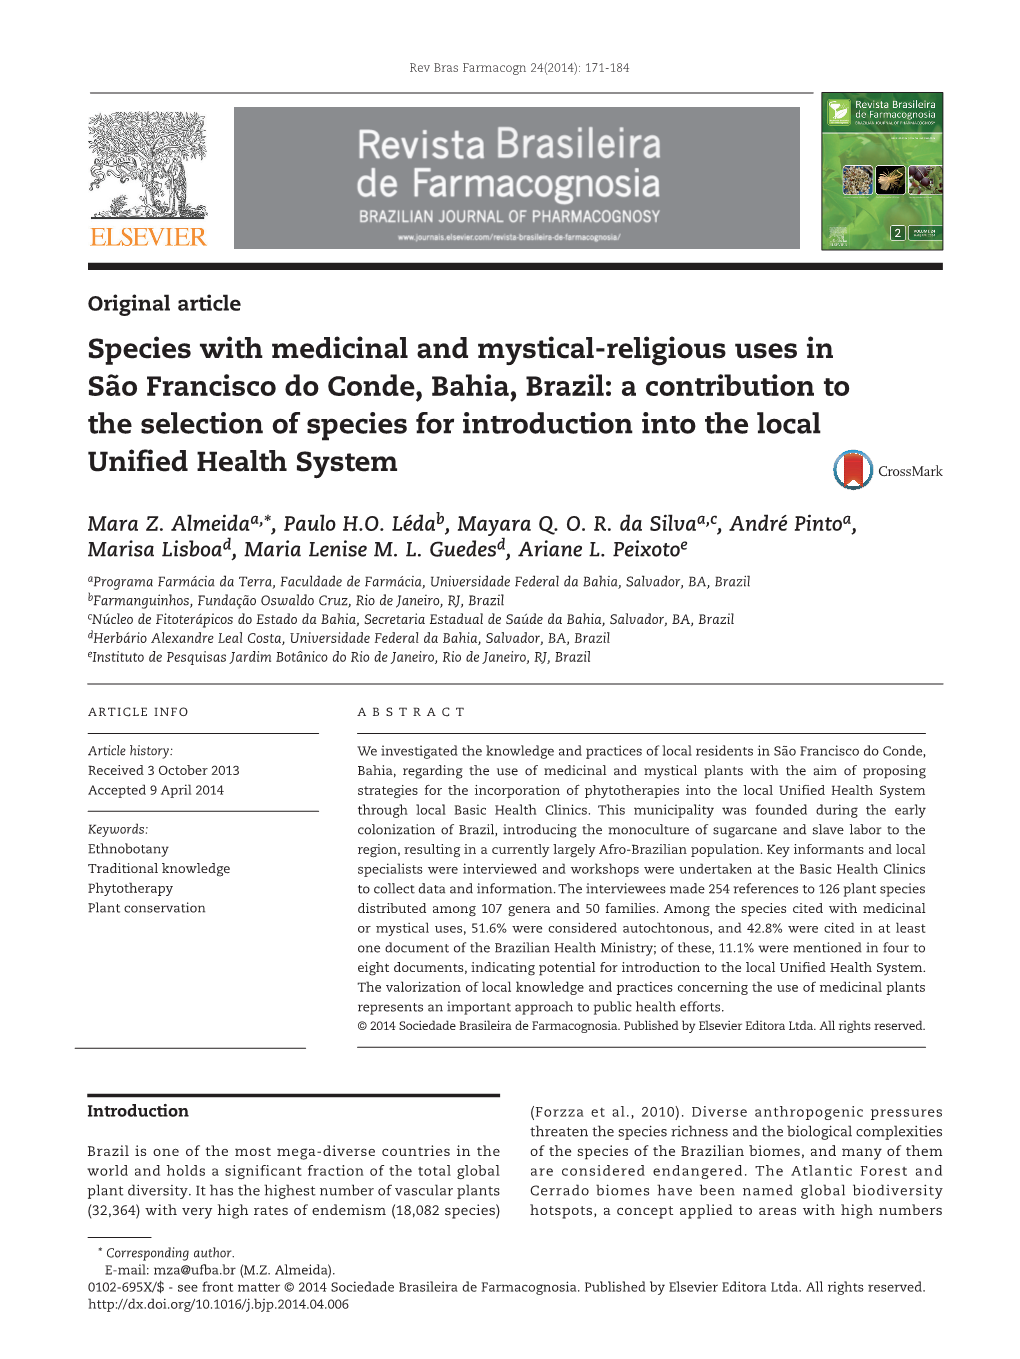 Species with Medicinal and Mystical-Religious